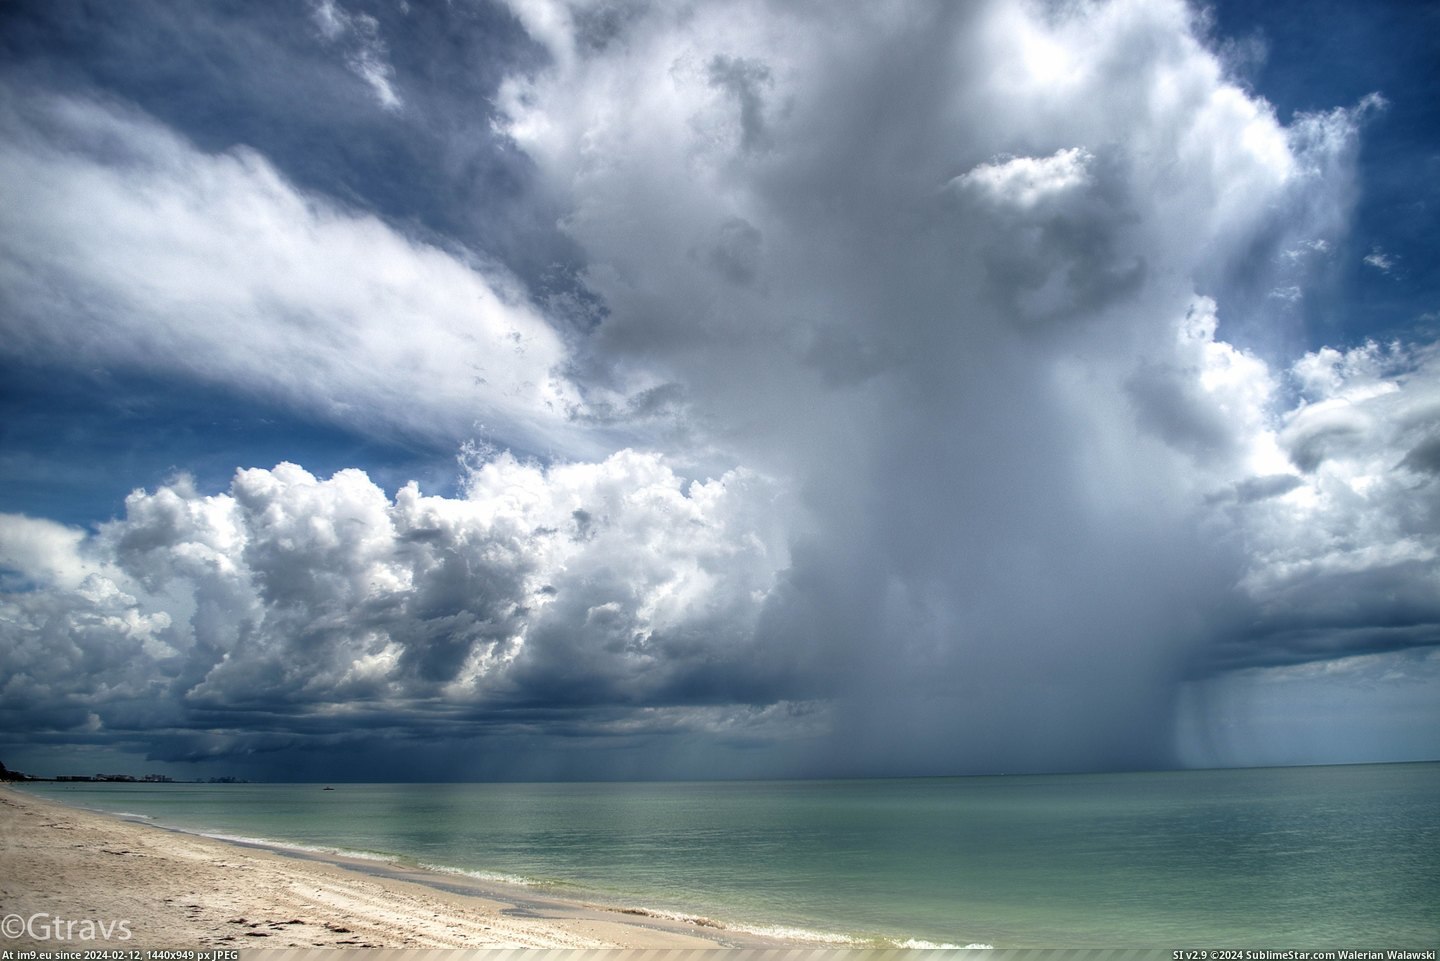 #Photo #Shower #North #Miles #Greg #Isolated #Travers #Rain #Naples #Florida [Earthporn] A photo I took of an isolated rain shower about 15 miles north of Naples, Florida. ©Greg Travers [4935x3266] Pic. (Image of album My r/EARTHPORN favs))